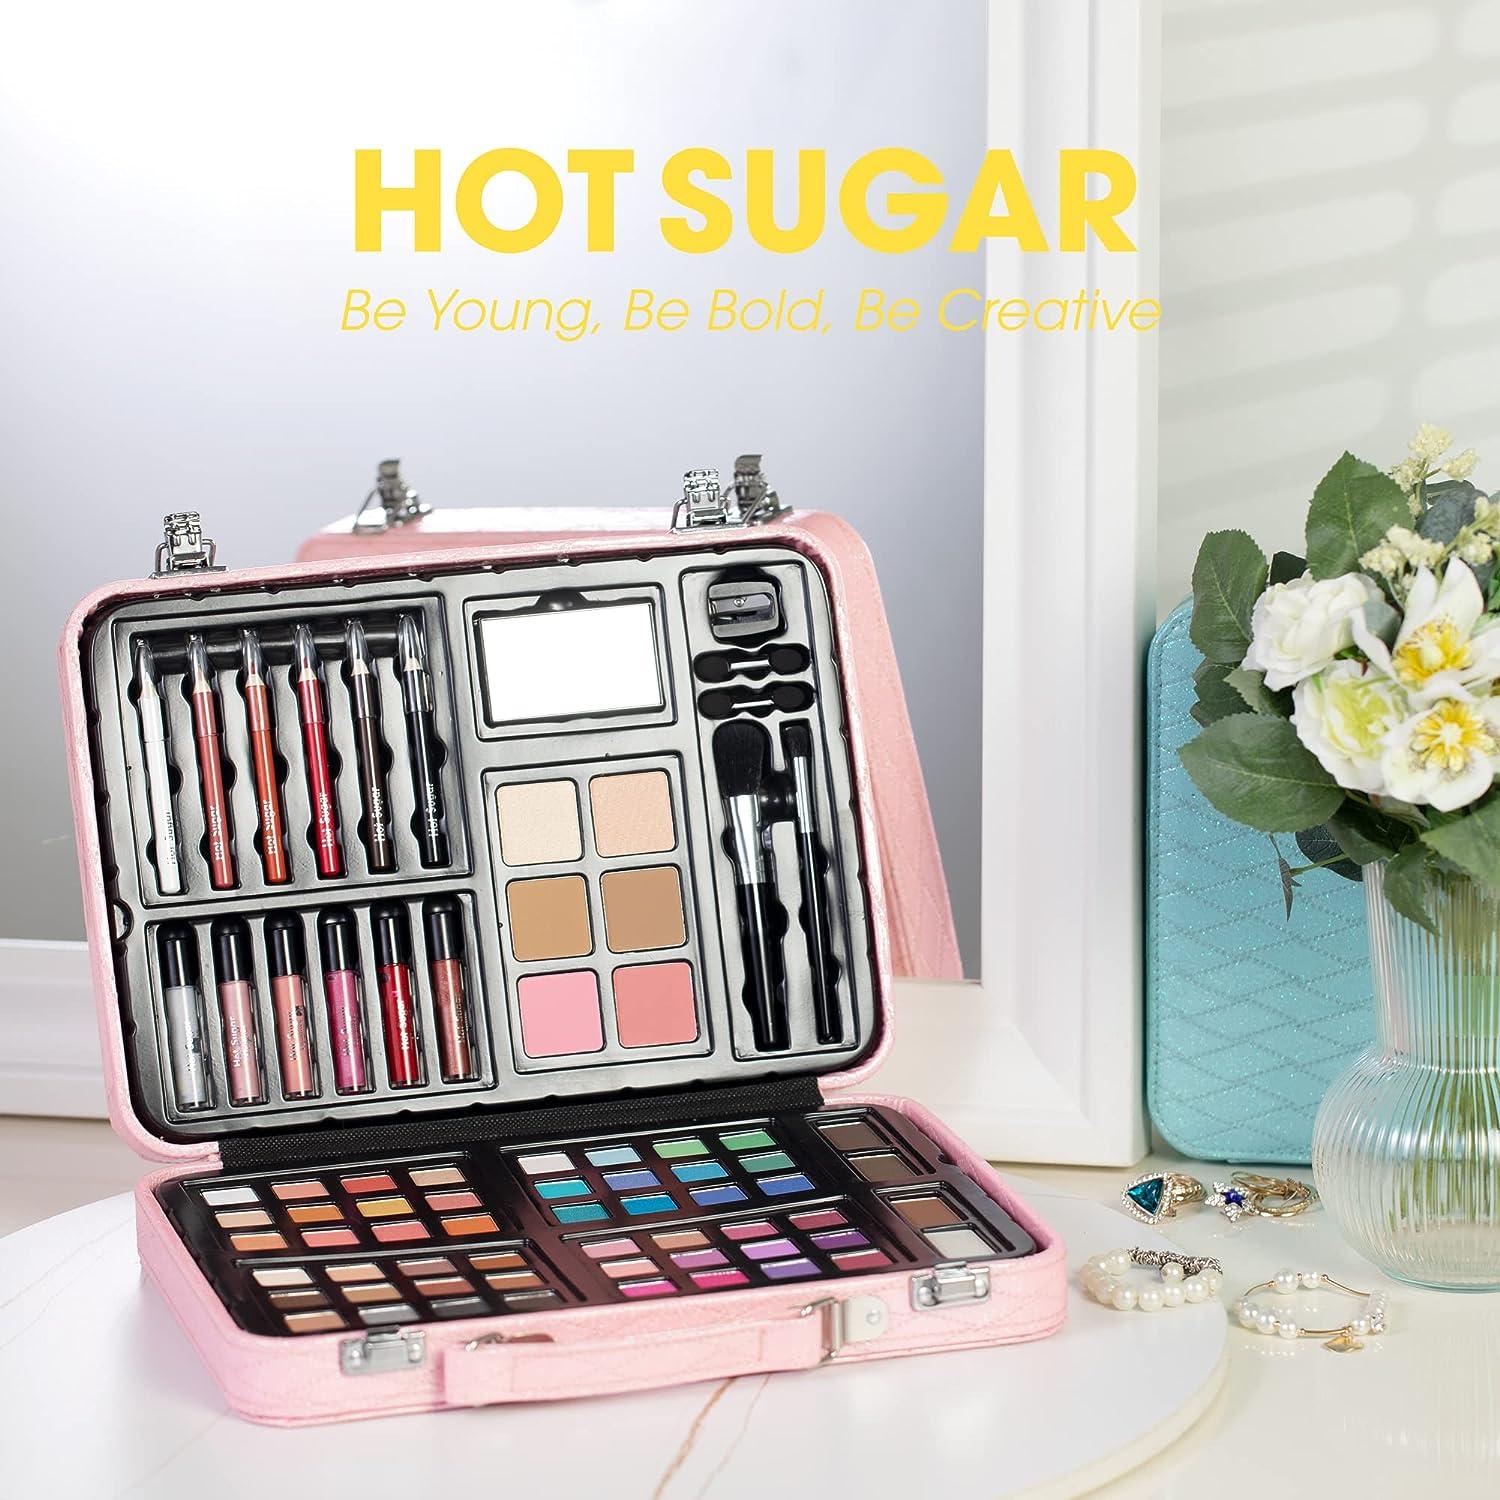 The Best Christmas Gifts For Makeup Lovers - SUGAR Cosmetics